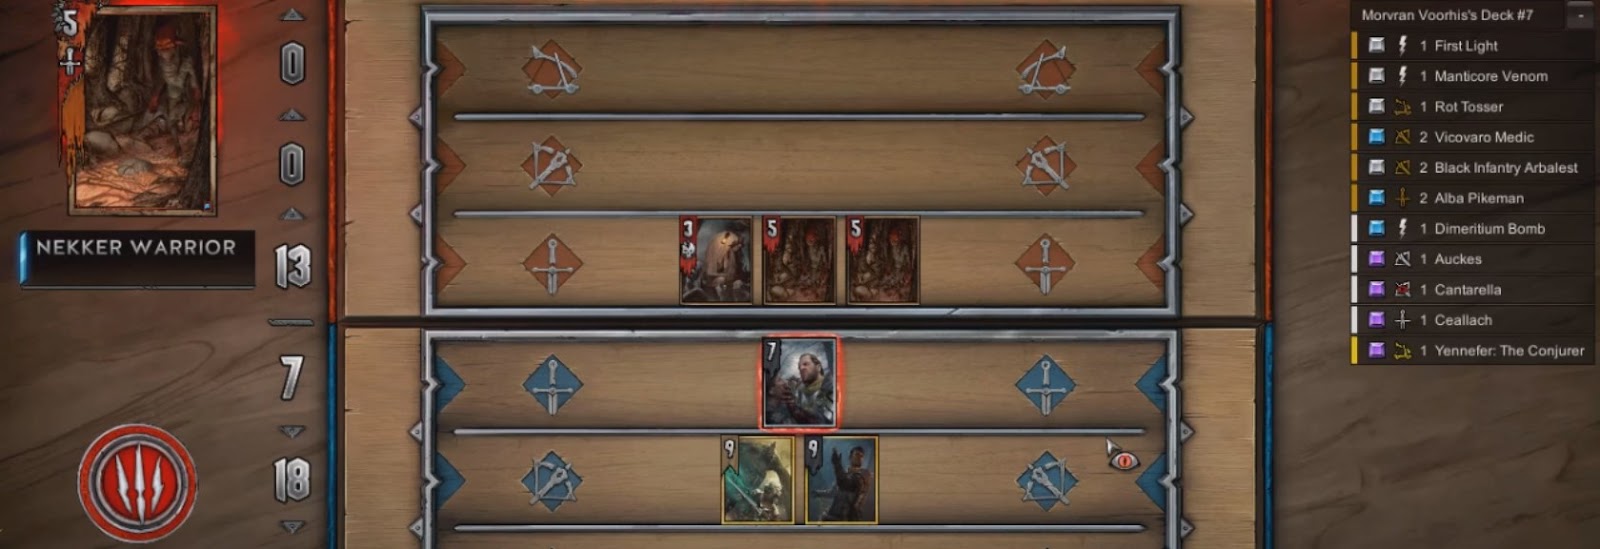 Gwent gameplay: various characters and their cards